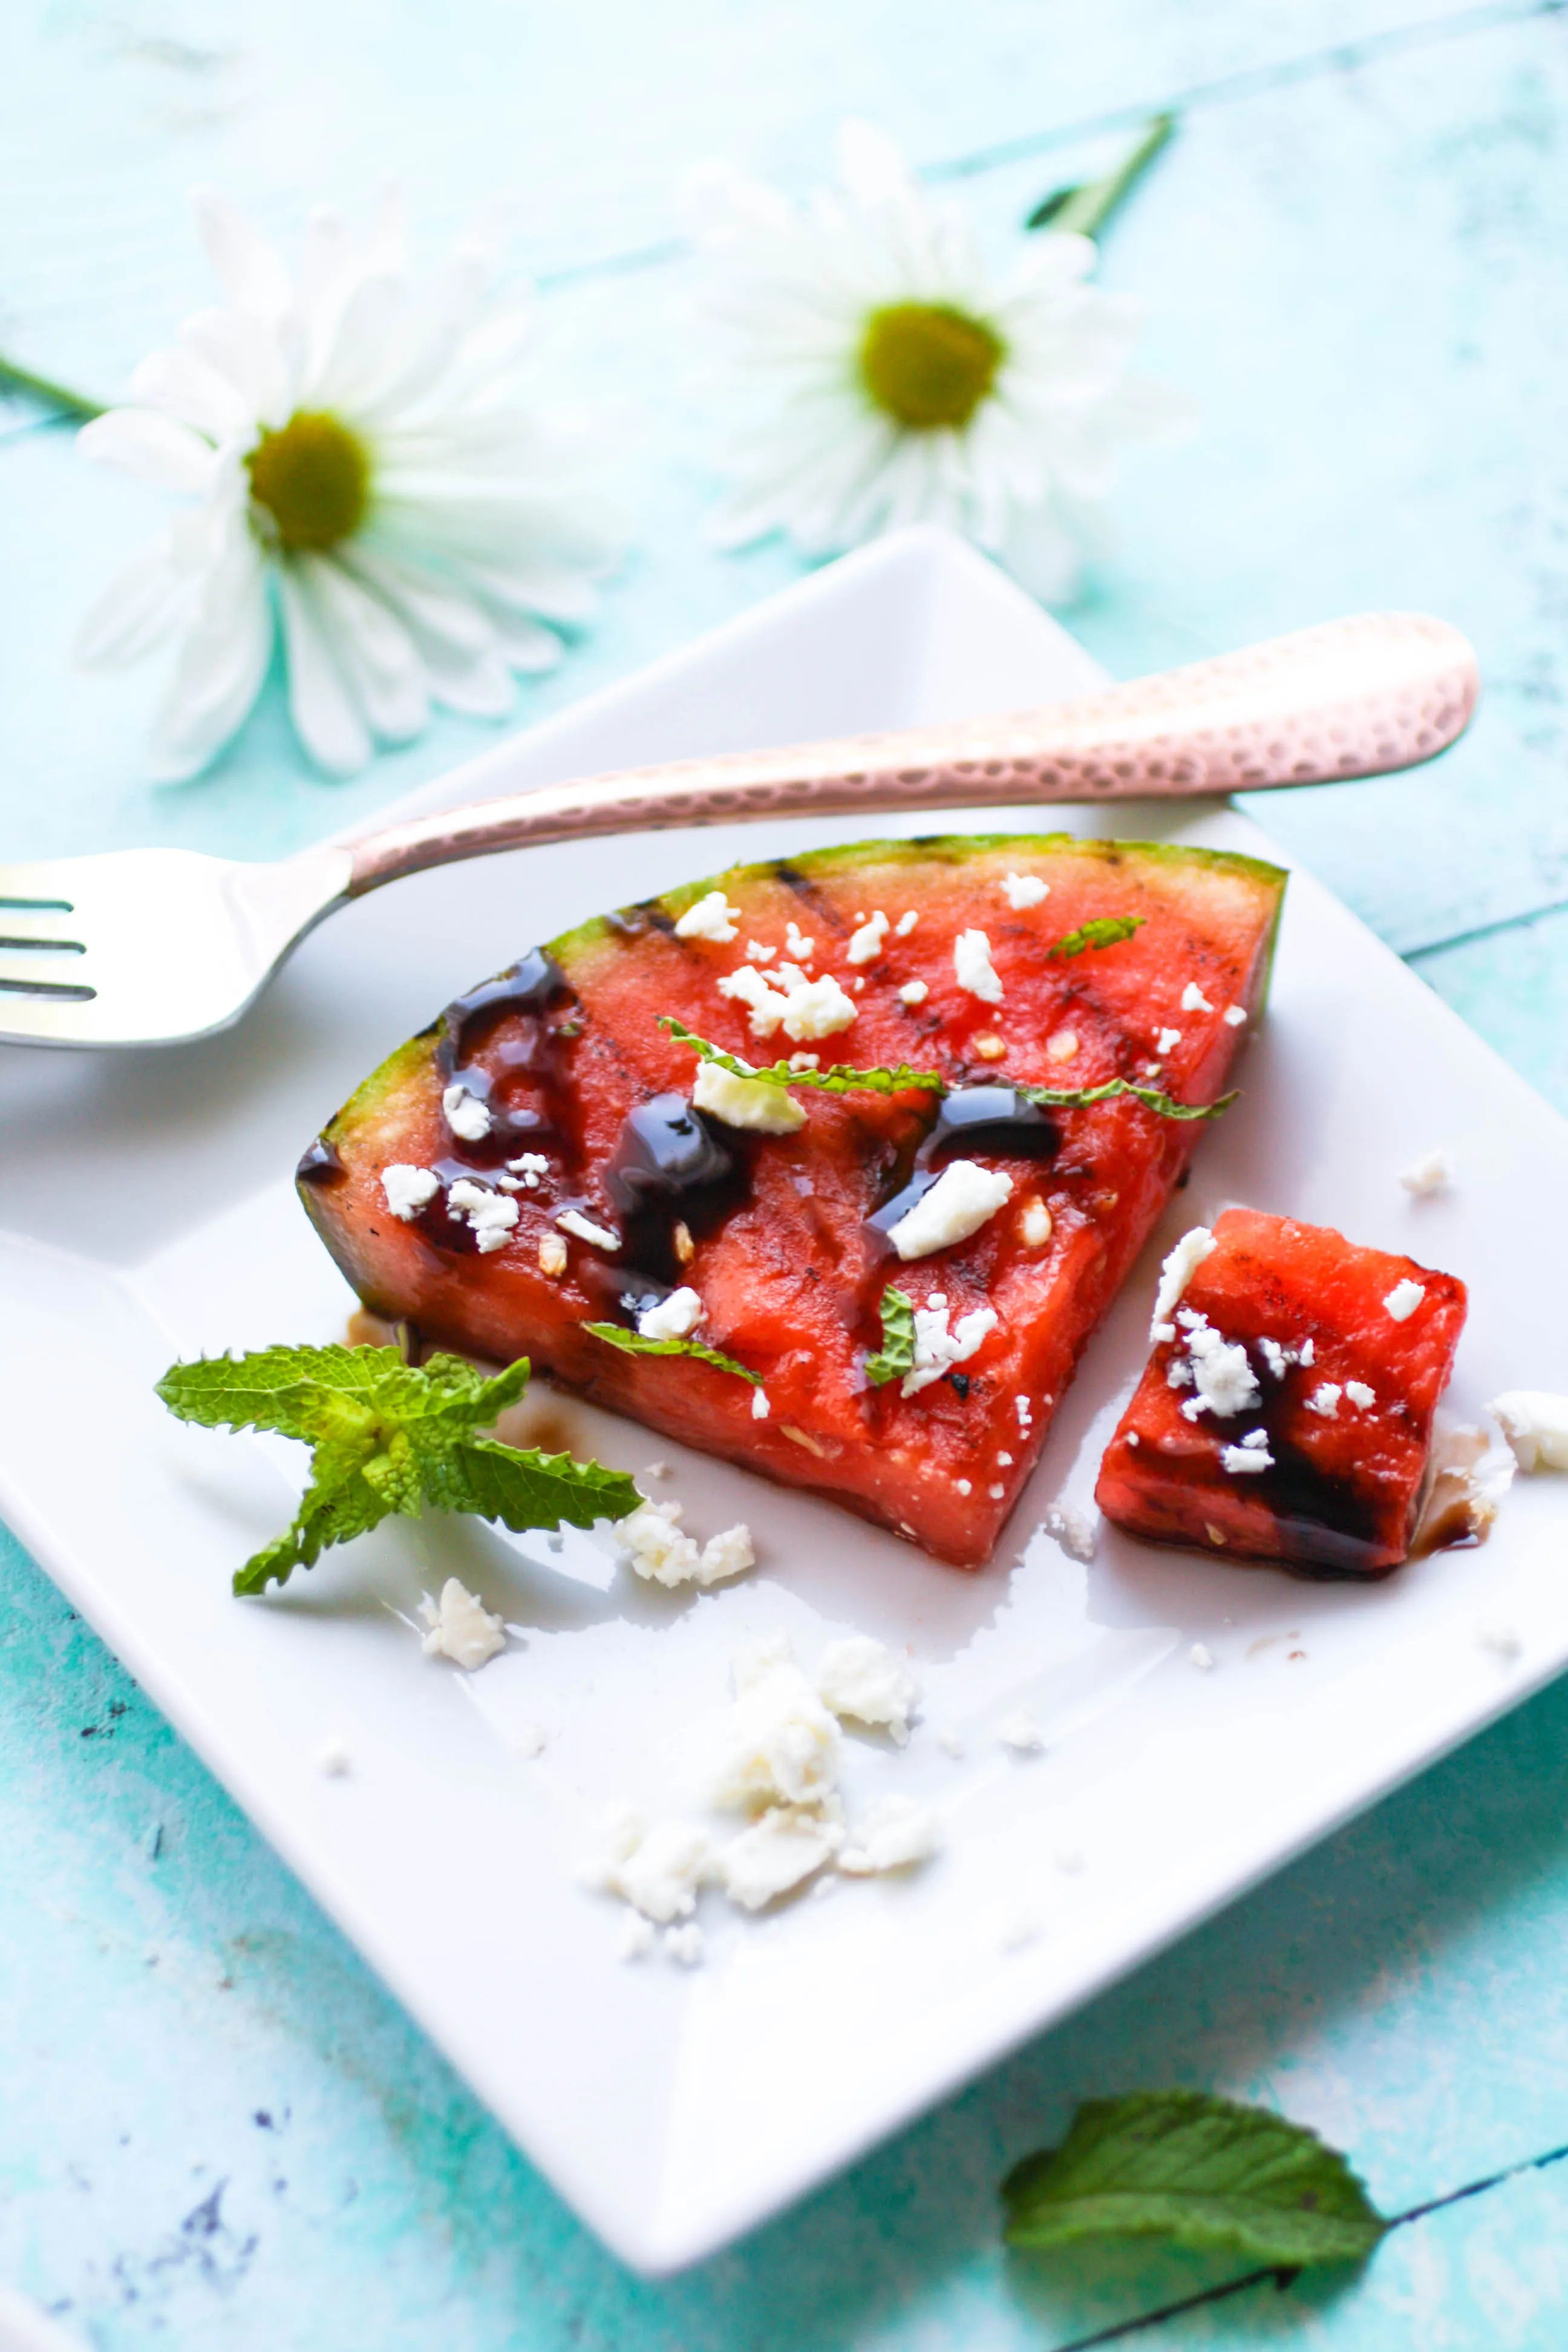 Grilled Watermelon with Feta, Mint, and Balsamic Glaze is a fresh and fun appetizer for the season. Grilled Watermelon with Feta, Mint, and Balsamic Glaze is an easy to make appetizer perfect for summer!